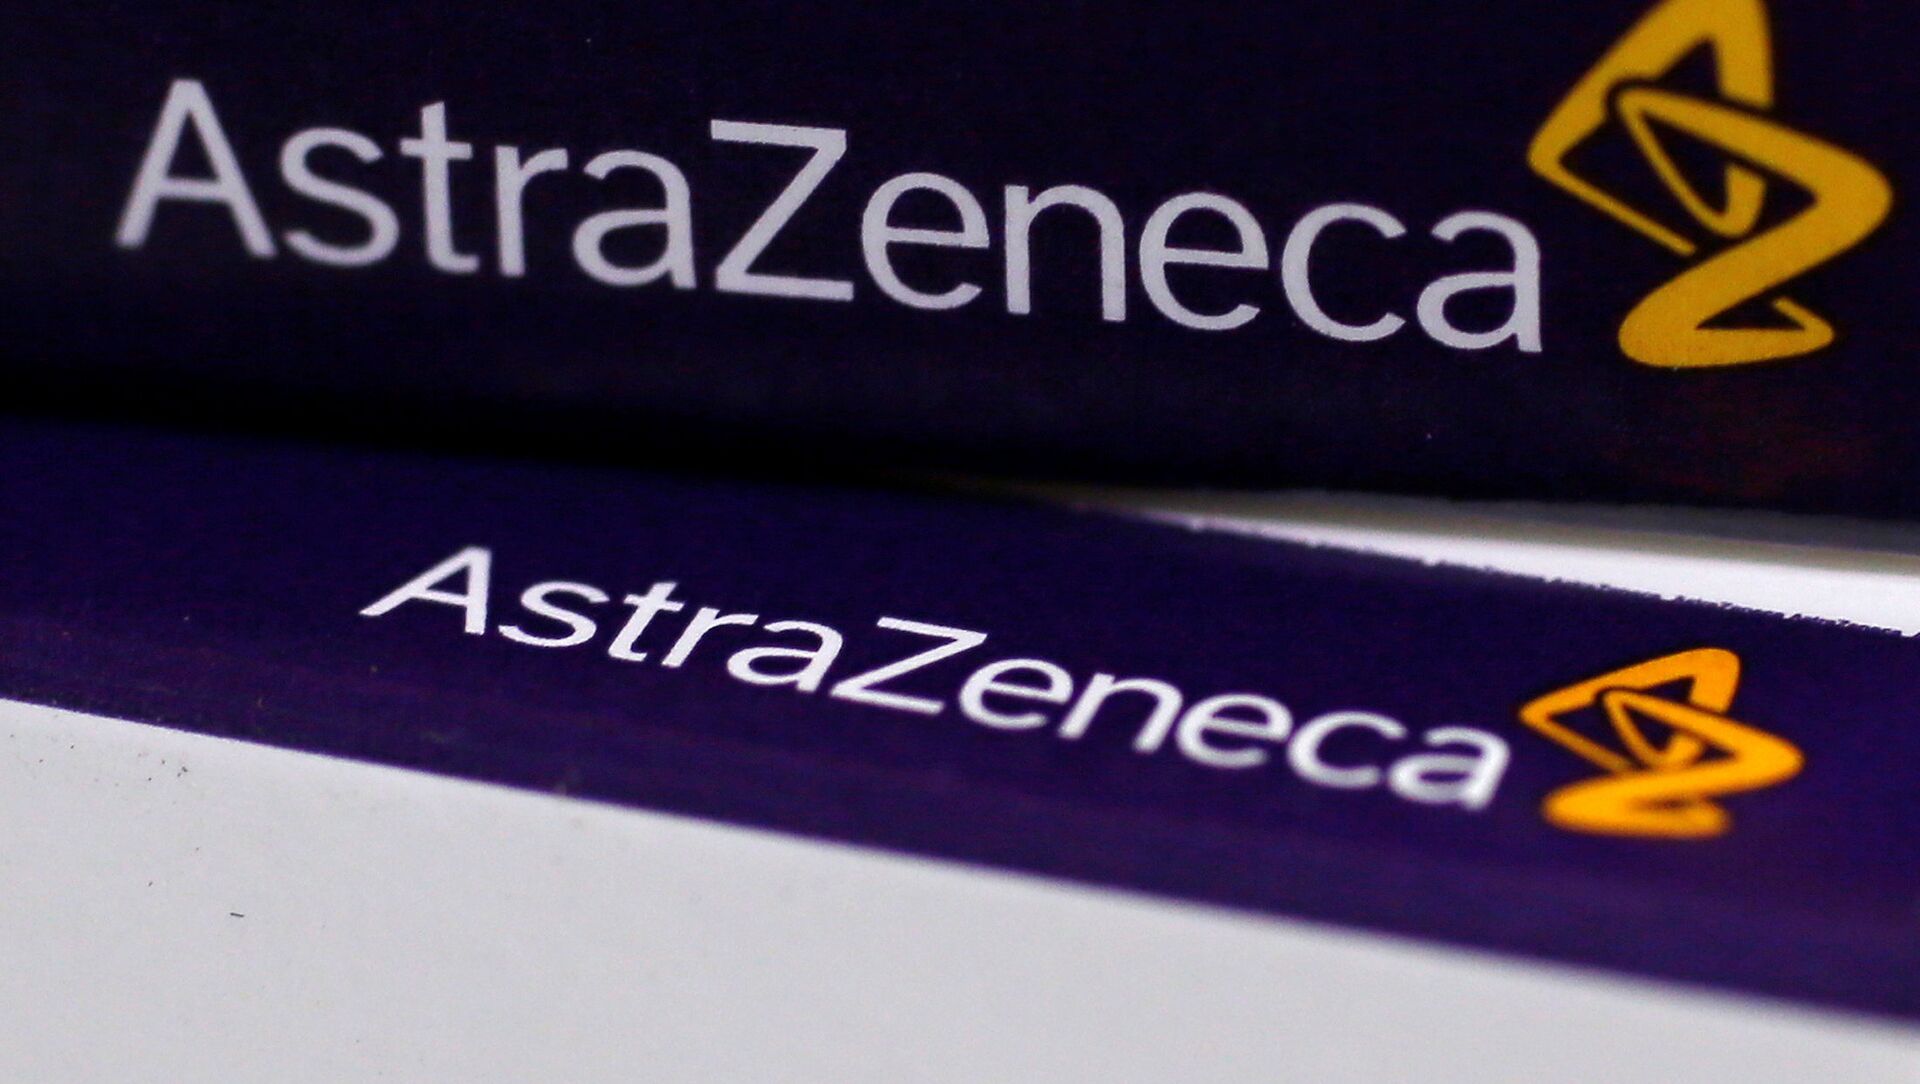 FILE PHOTO:The logo of AstraZeneca is seen on medication packages in a pharmacy in London. - Sputnik International, 1920, 15.03.2021